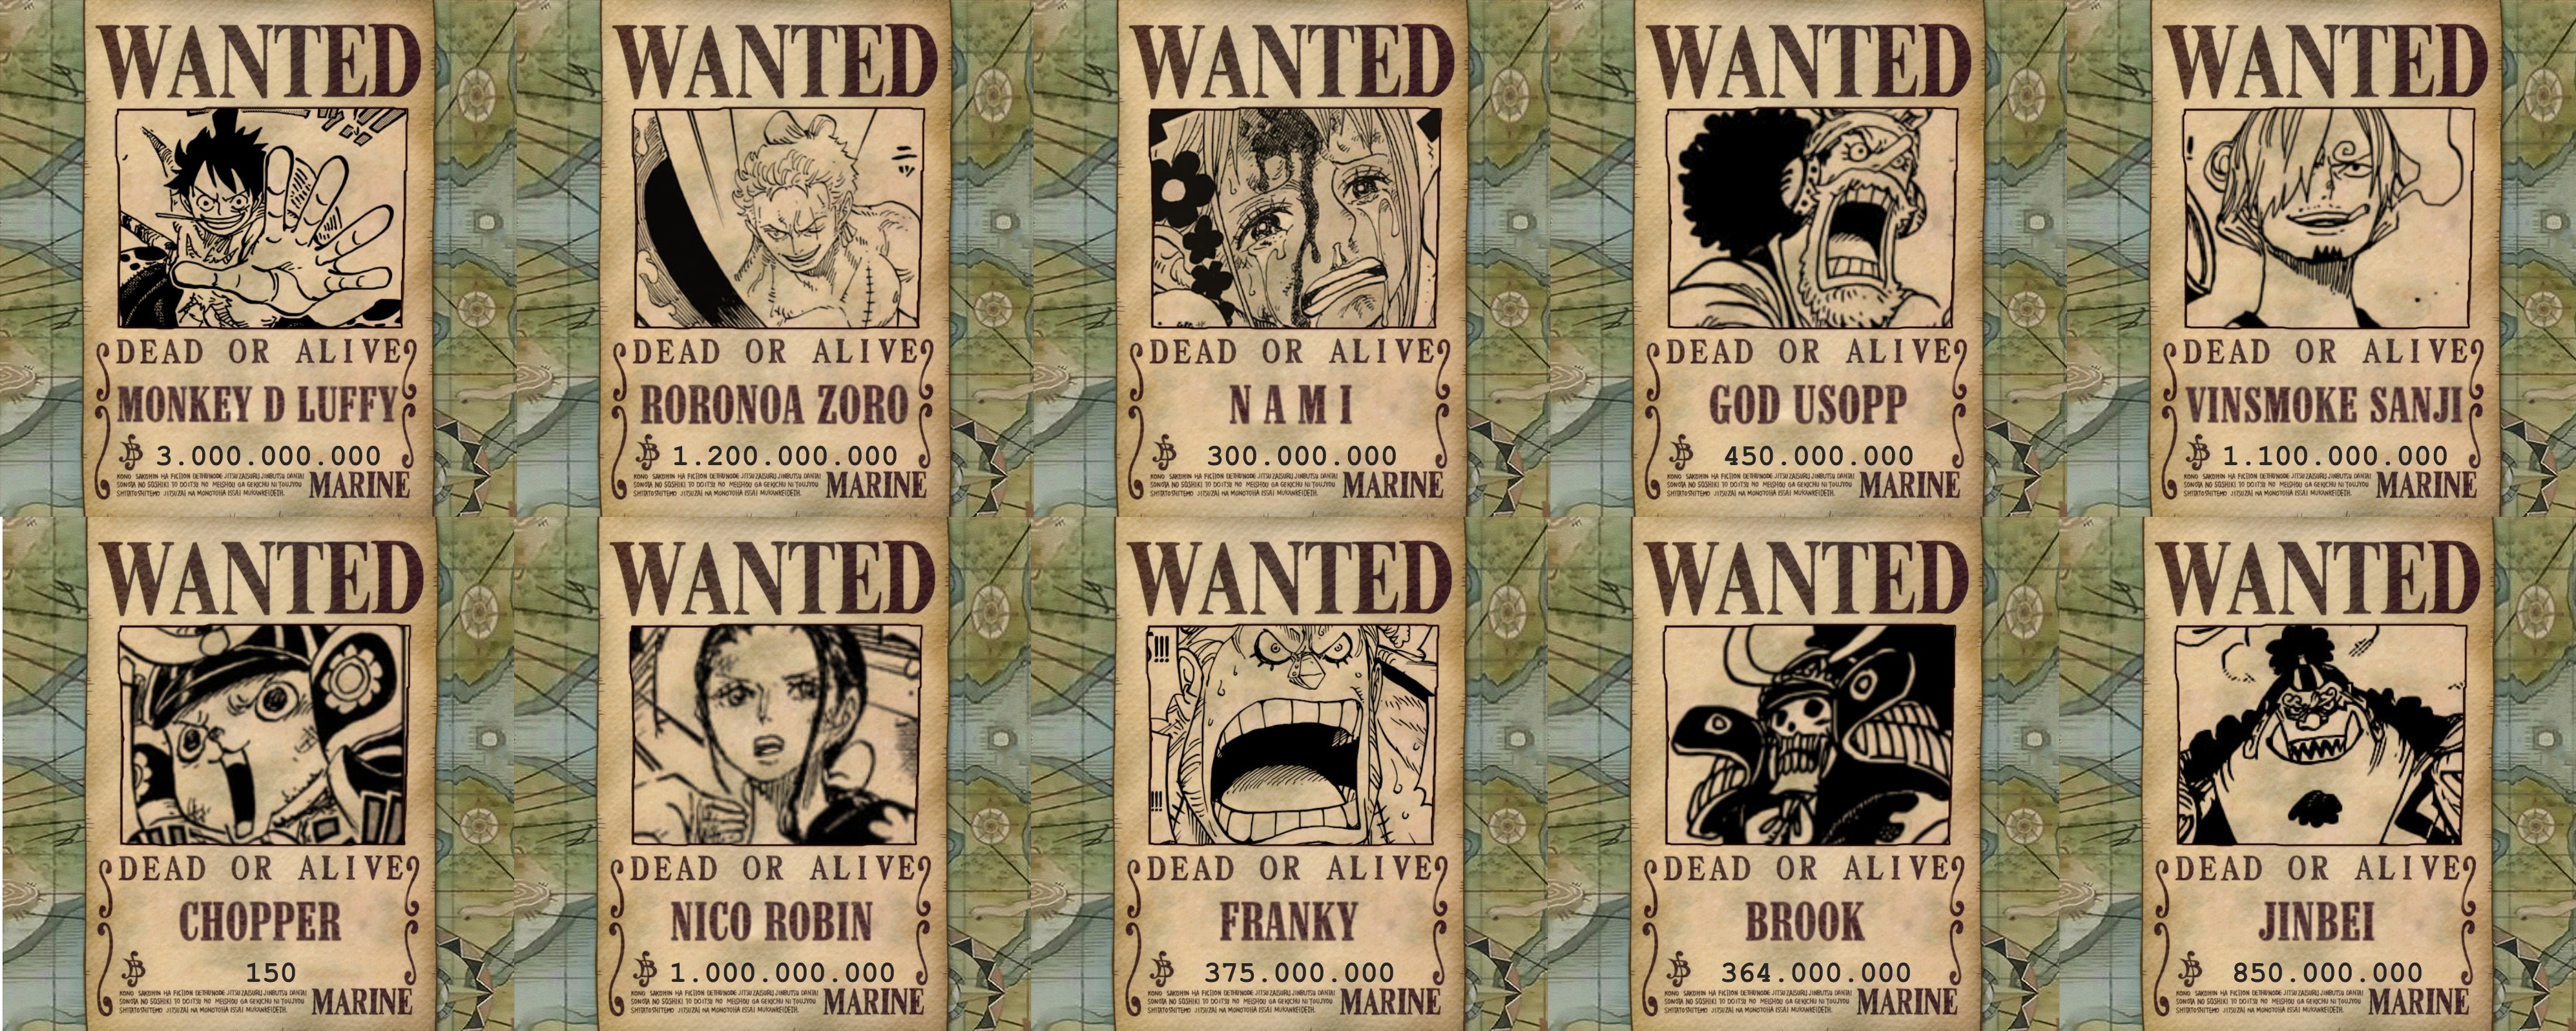 My take on The Straw Hat pirates bounties after Wano